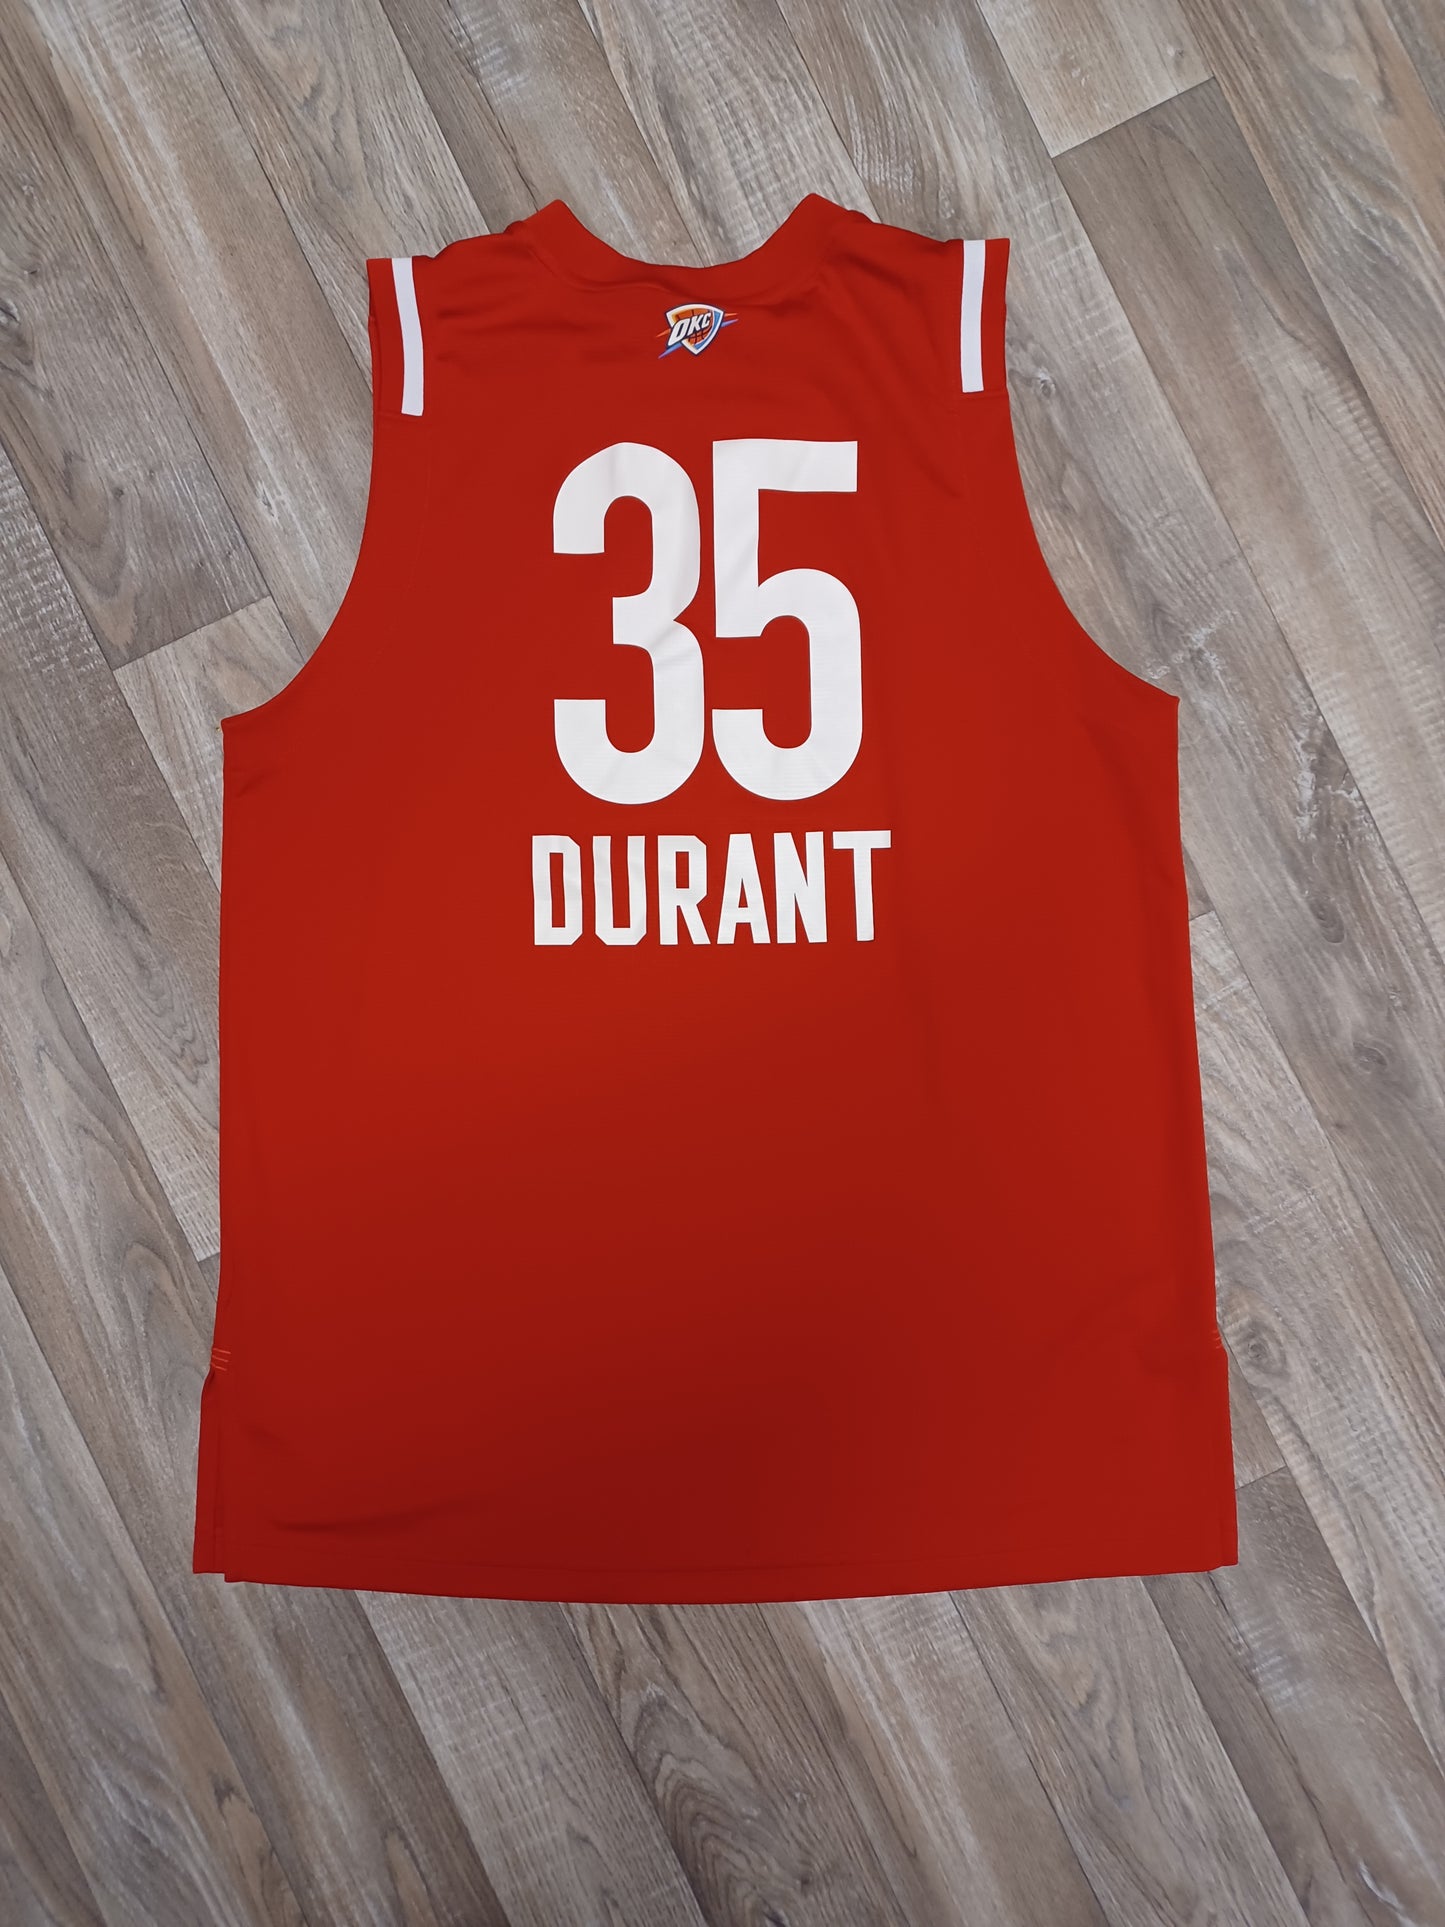 Kevin Durant NBA All Star 2016 Jersey Size Large